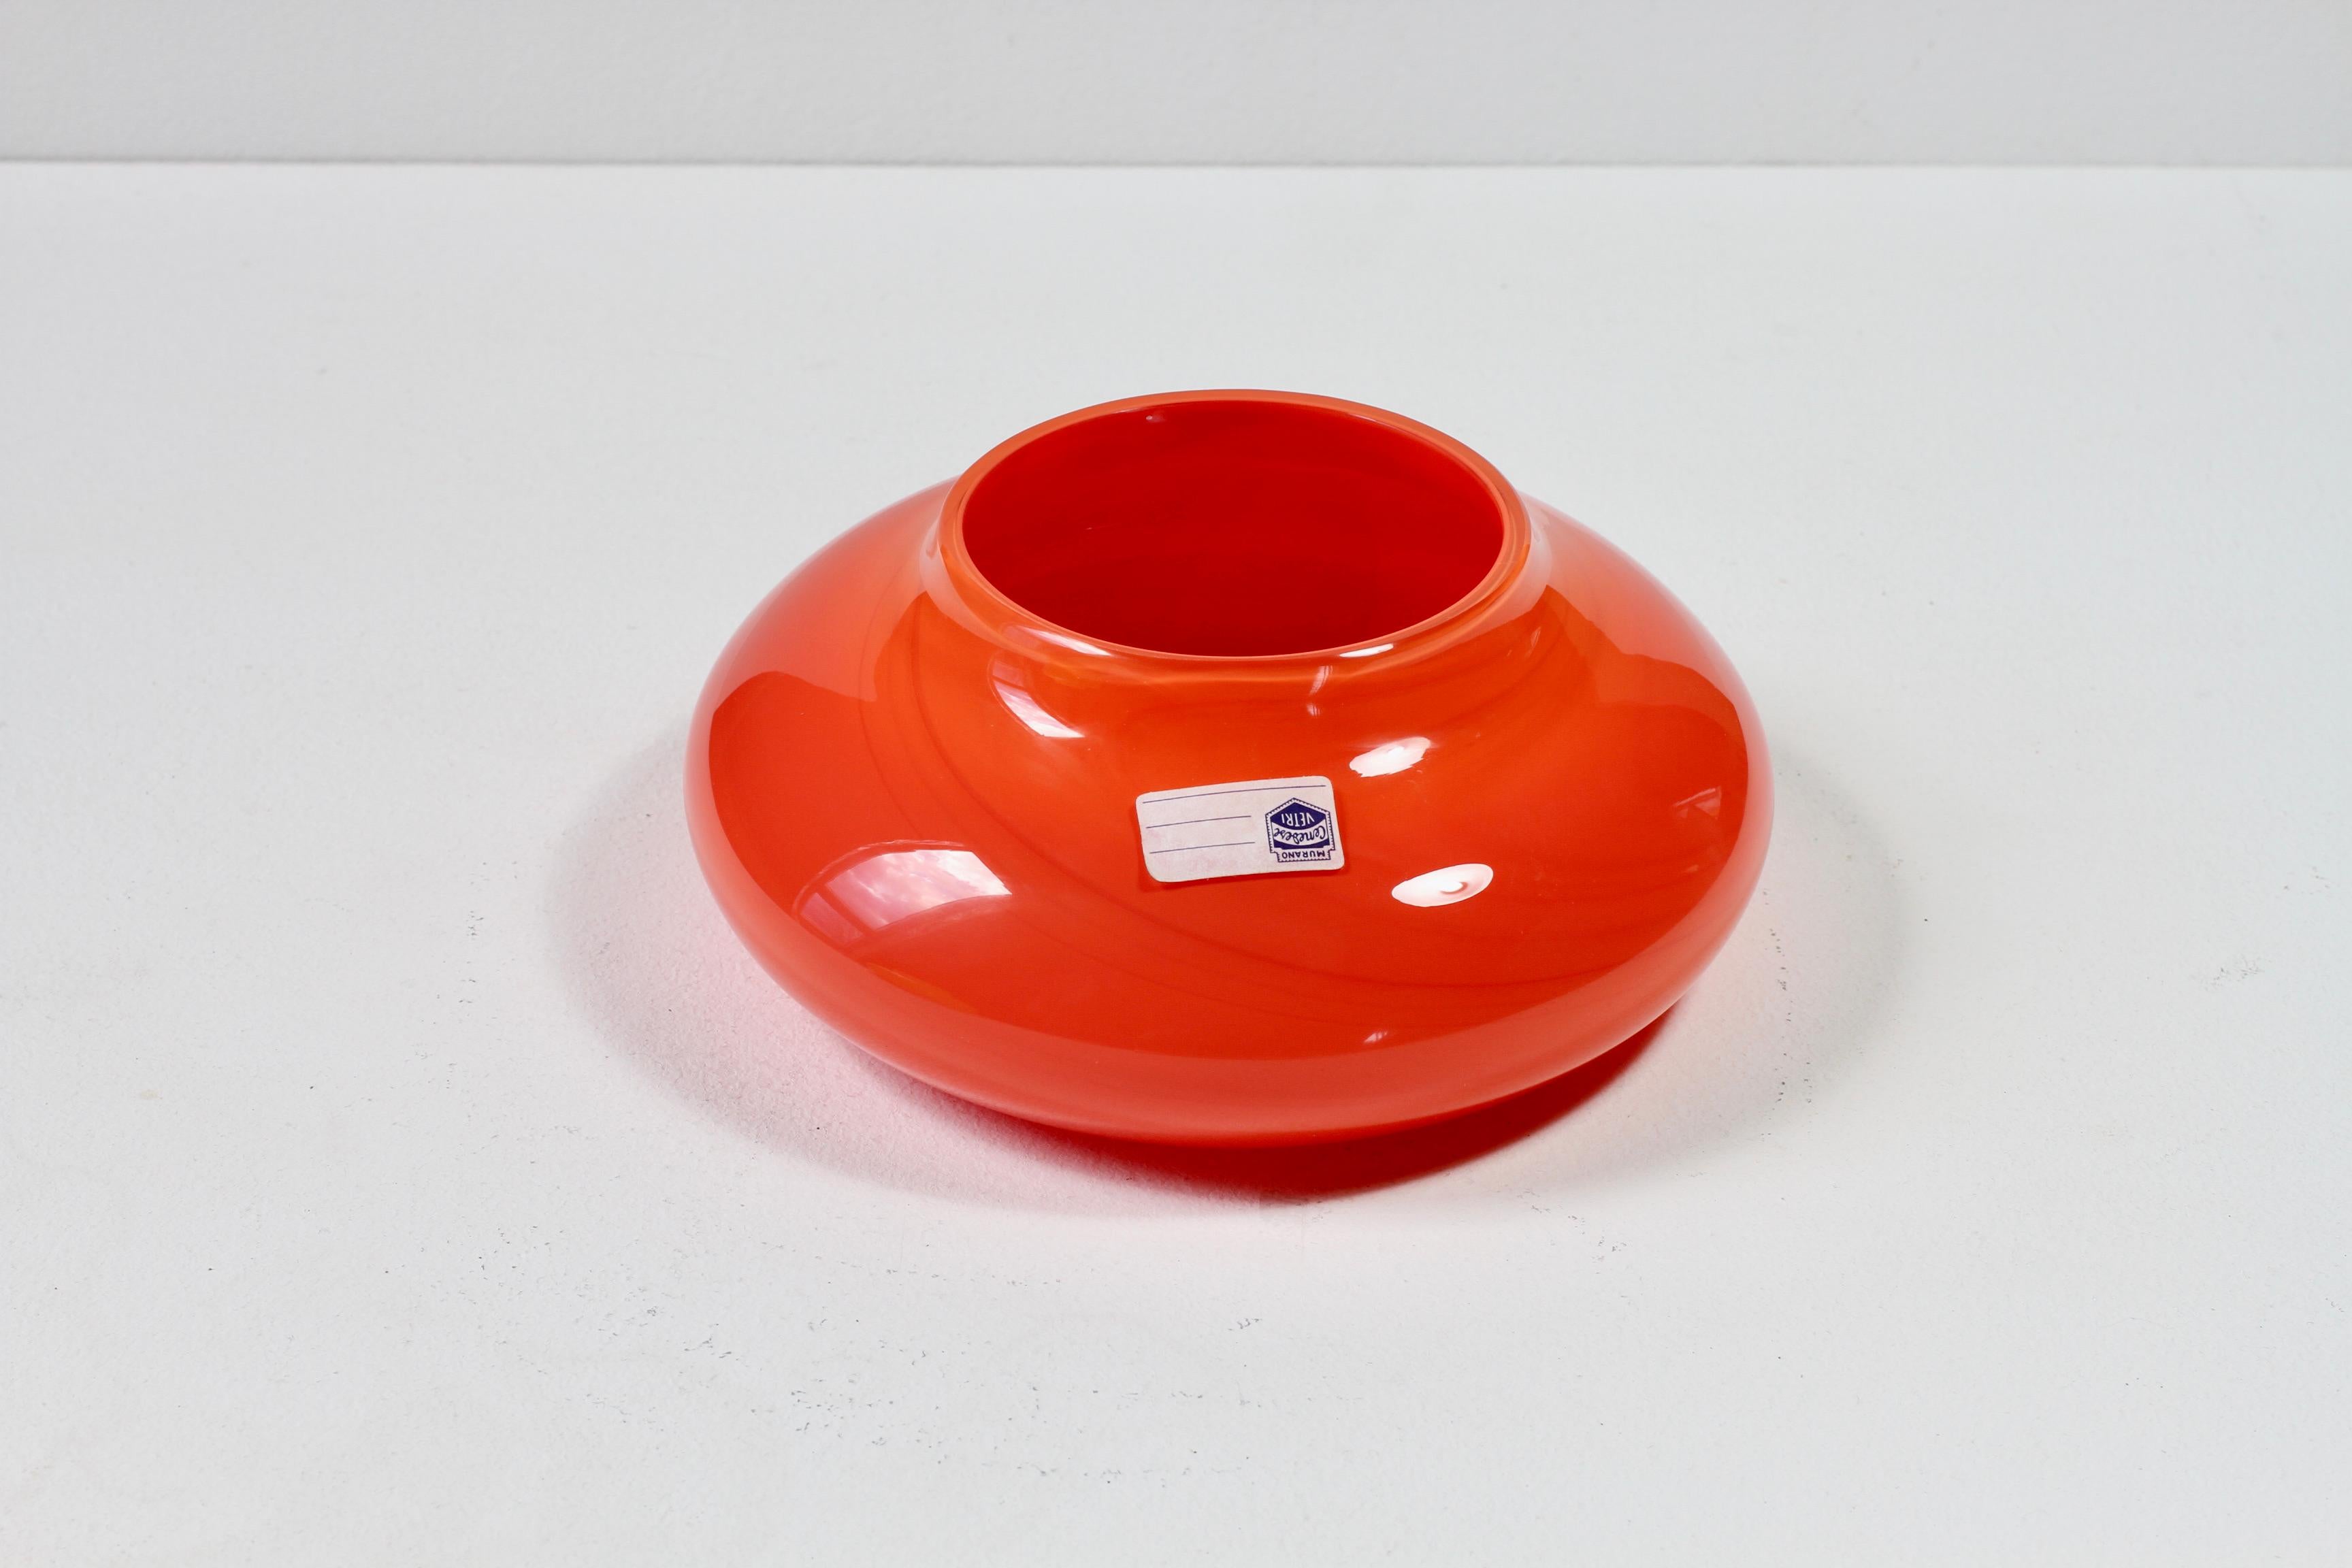 Wonderful vintage Mid-Century Modern glass bowl or vase in bright red attributed to Ermanno Nason for Cenedese of Murano, Italy. 

This can be used as a bowl, dish, vide-poche, ashtray or as a vase when turned upside down - perfect for displaying